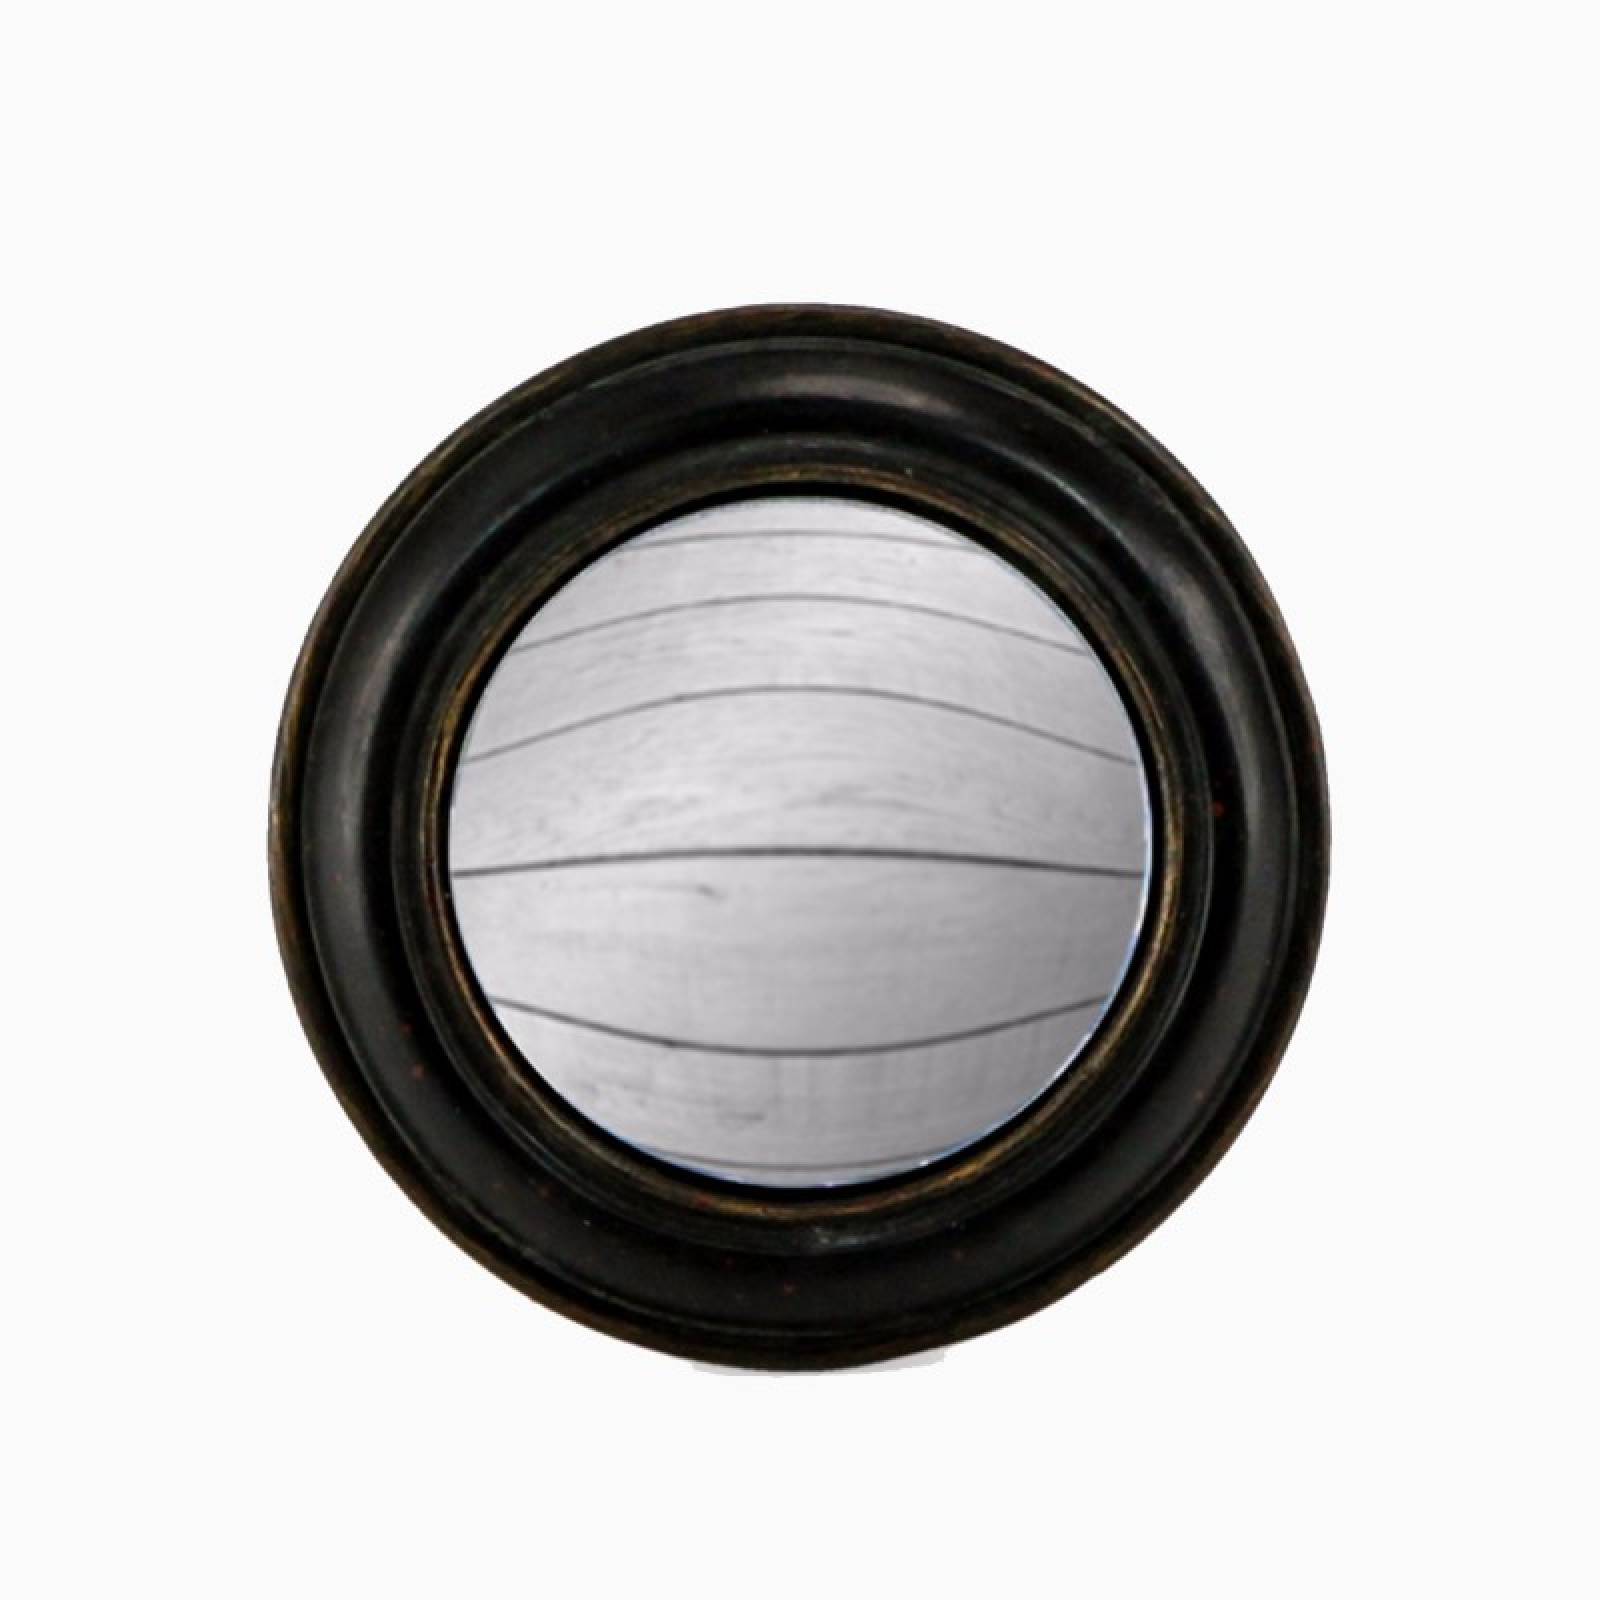 Antiqued Black Rounded Frame Small Convex Mirror D: 14cm